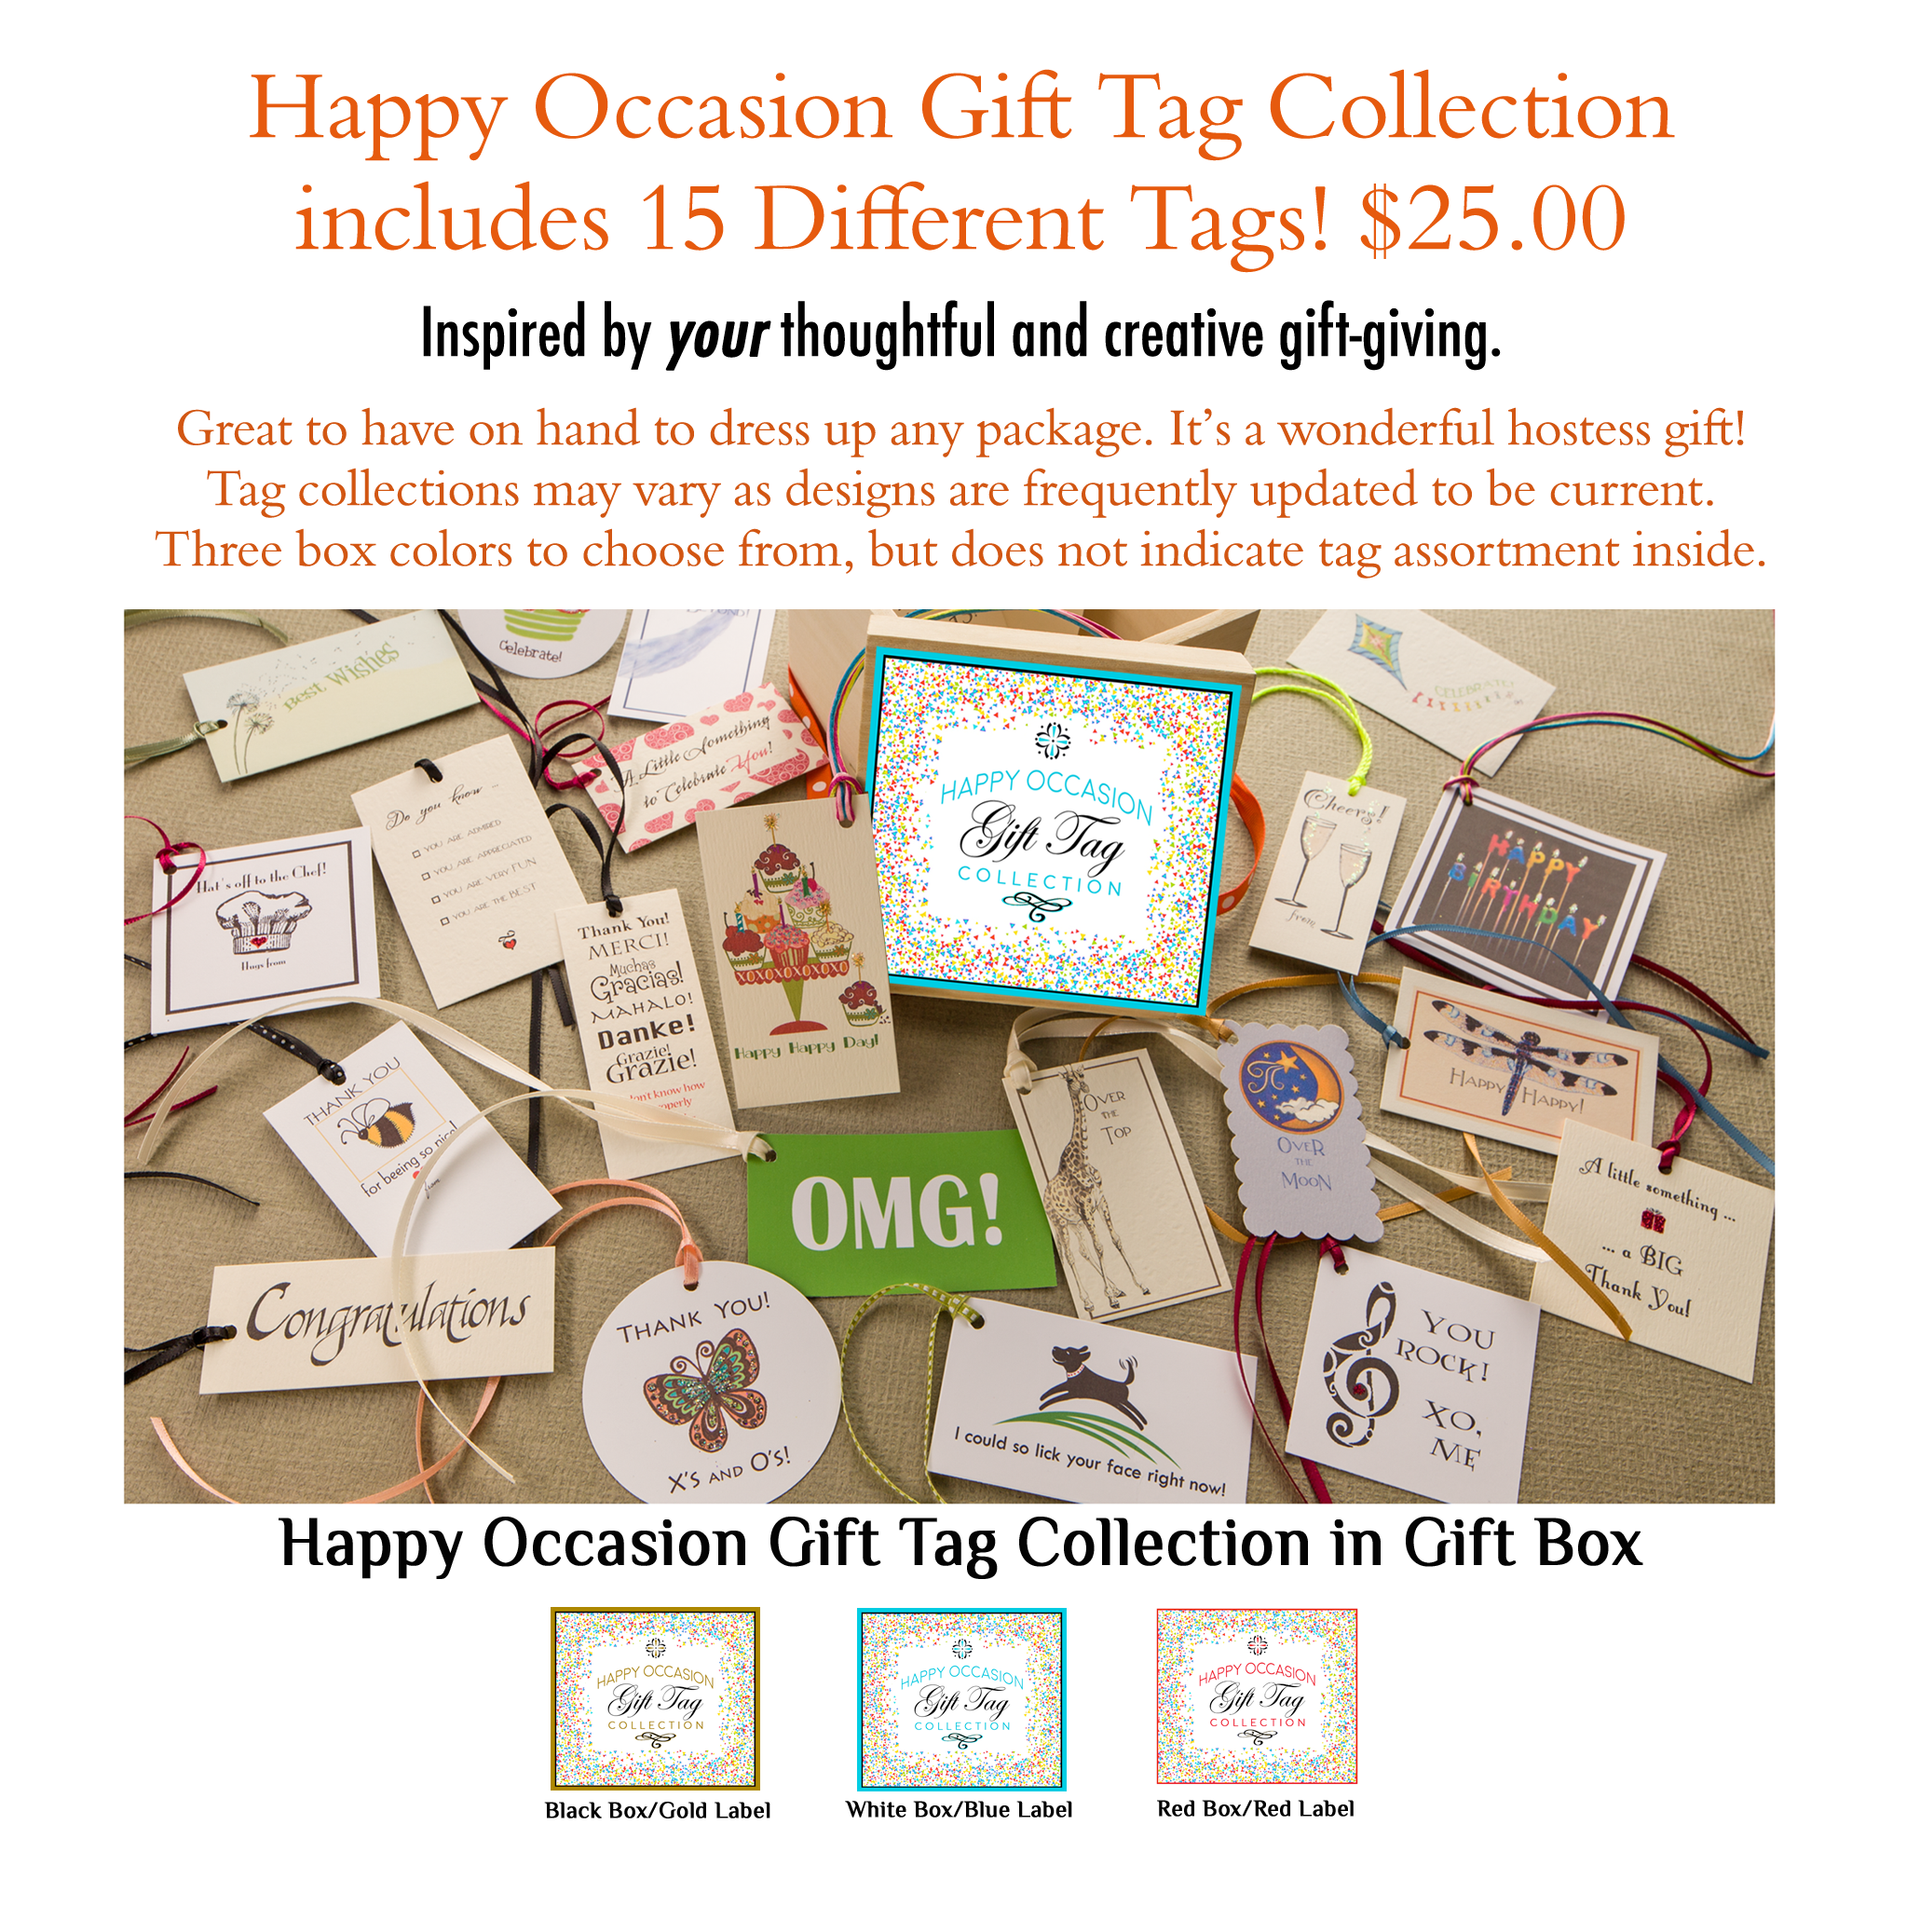 7 Sets of Free All-Occasion Gift Tags